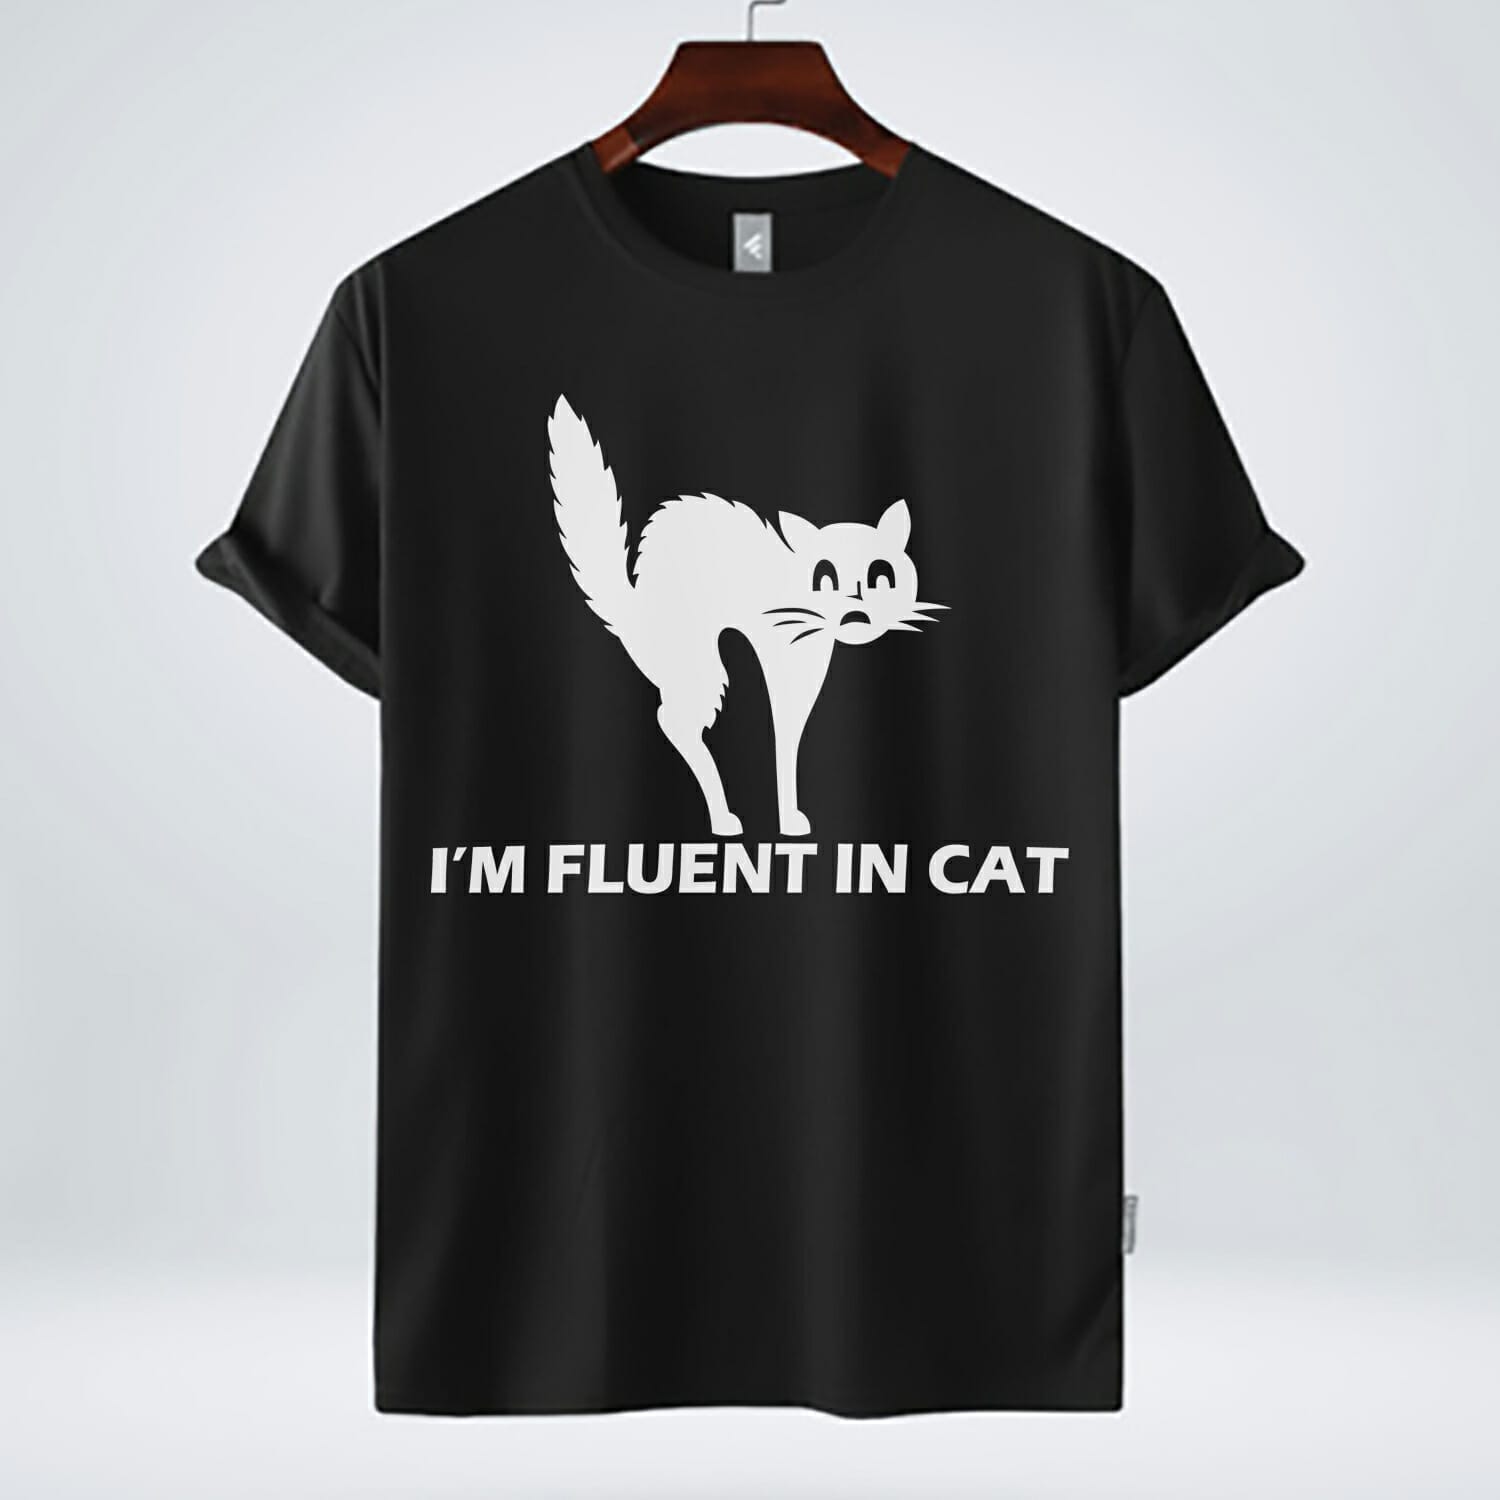 Show off your feline finesse with our 'I'm Fluent In Cat' Funny Free T-shirt Design – perfect for cat lovers with a sense of humor